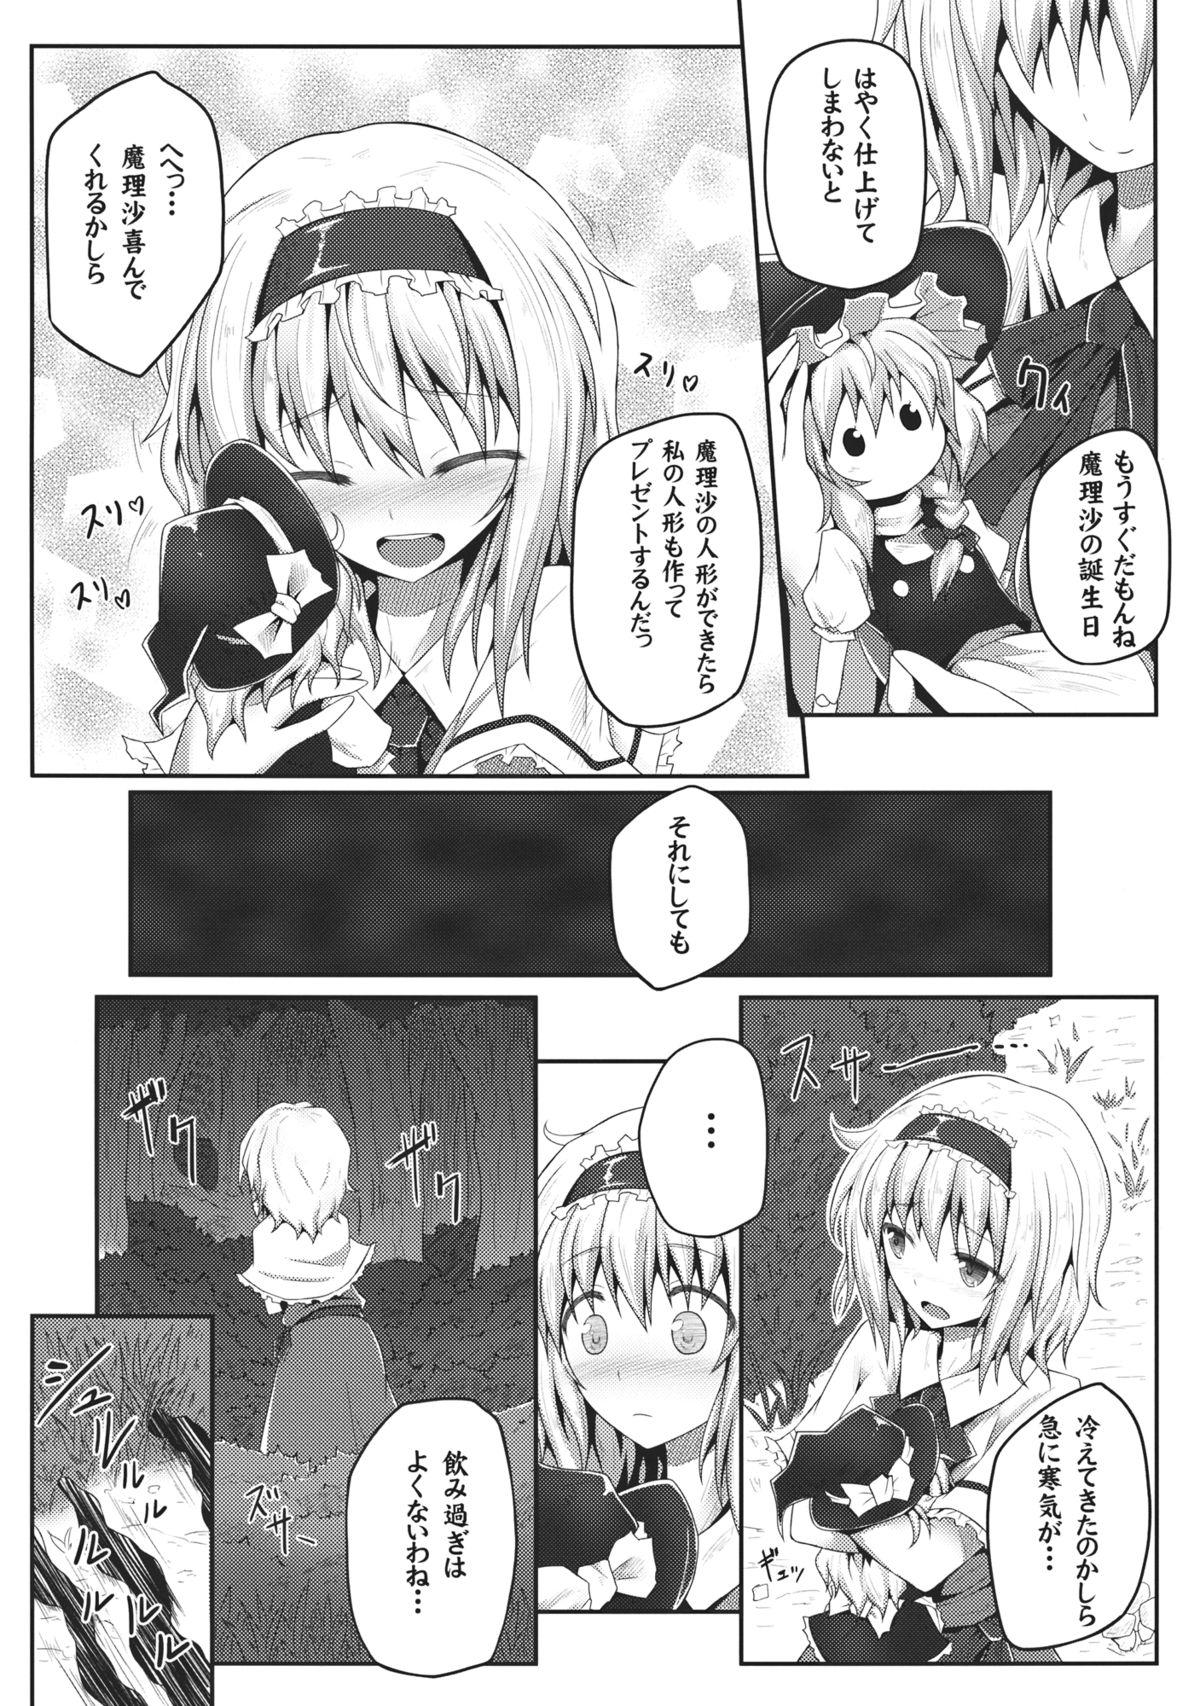 Strap On Nozomiusu - Touhou project Daddy - Page 5